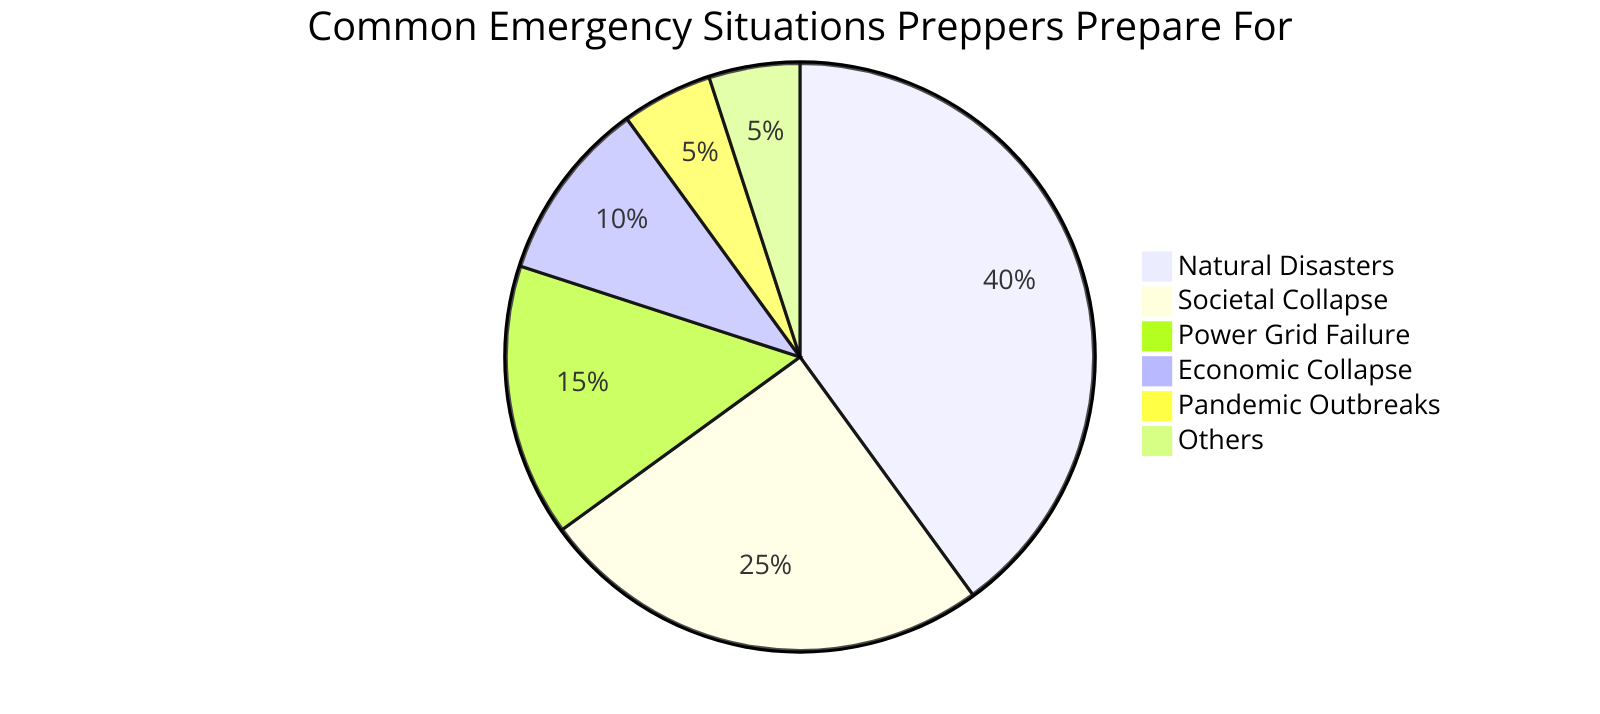  the percentage breakdown of common emergency situations preppers prepare for